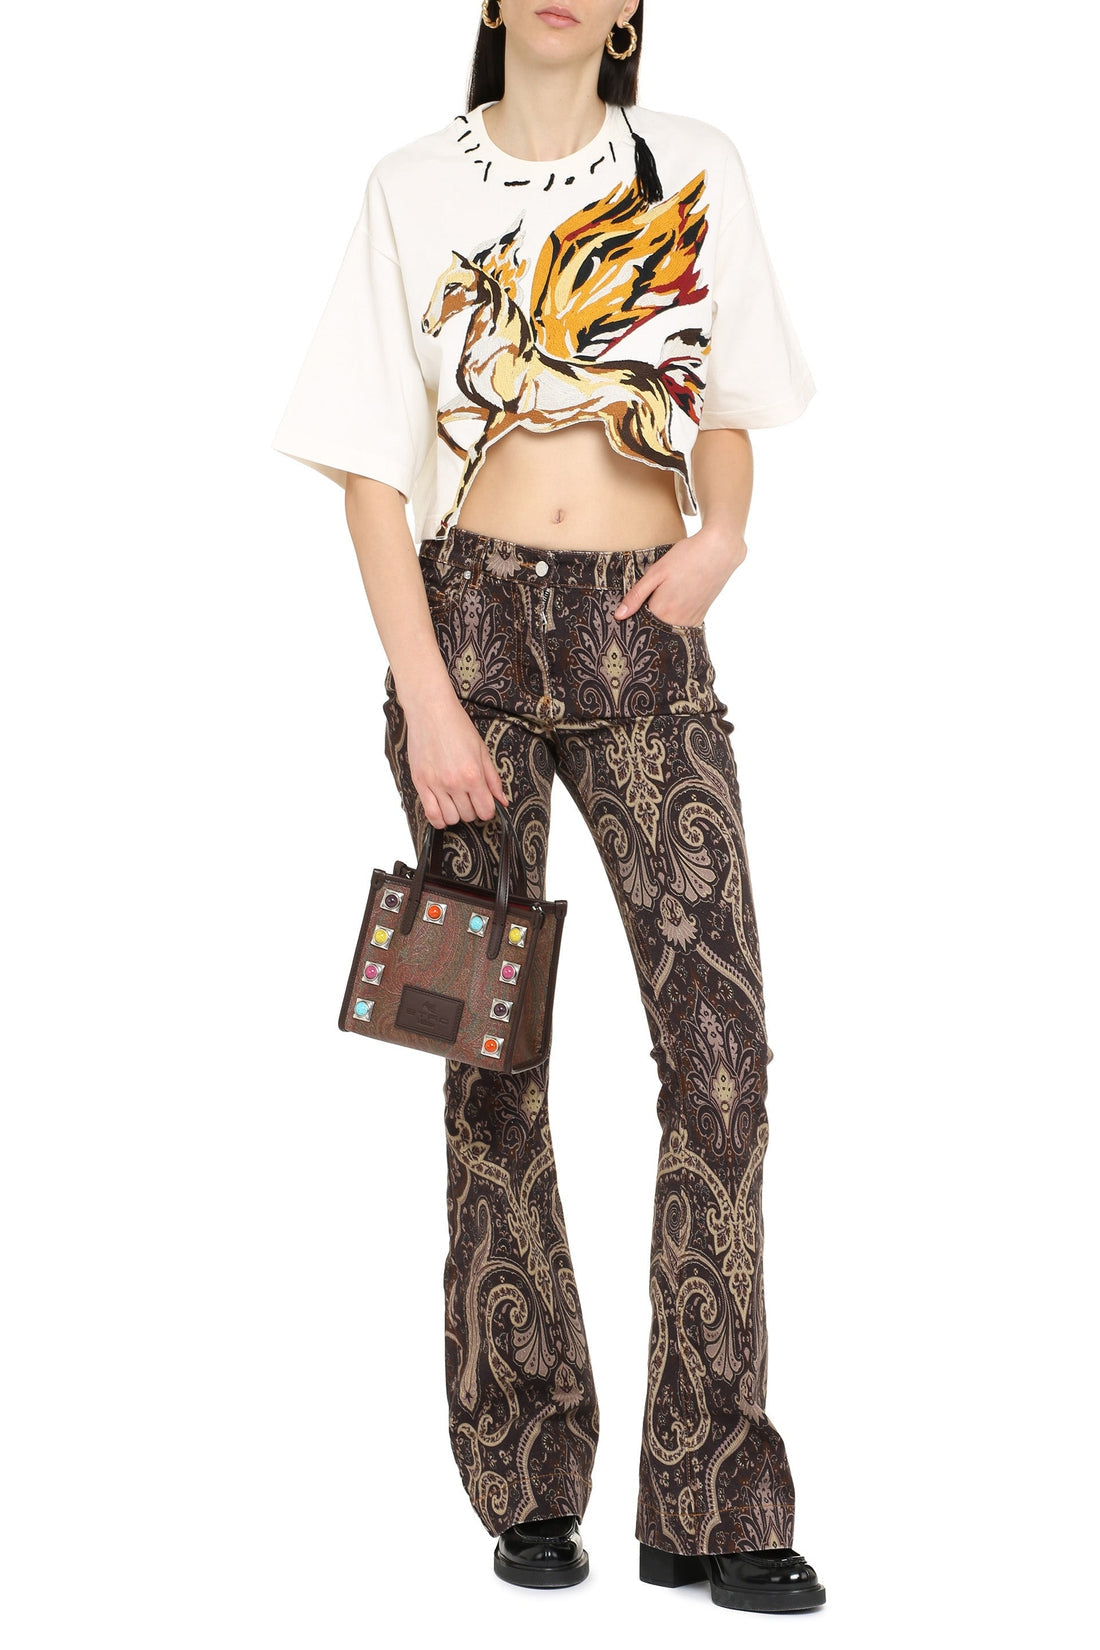 Etro-OUTLET-SALE-Embroidered cropped t-shirt-ARCHIVIST